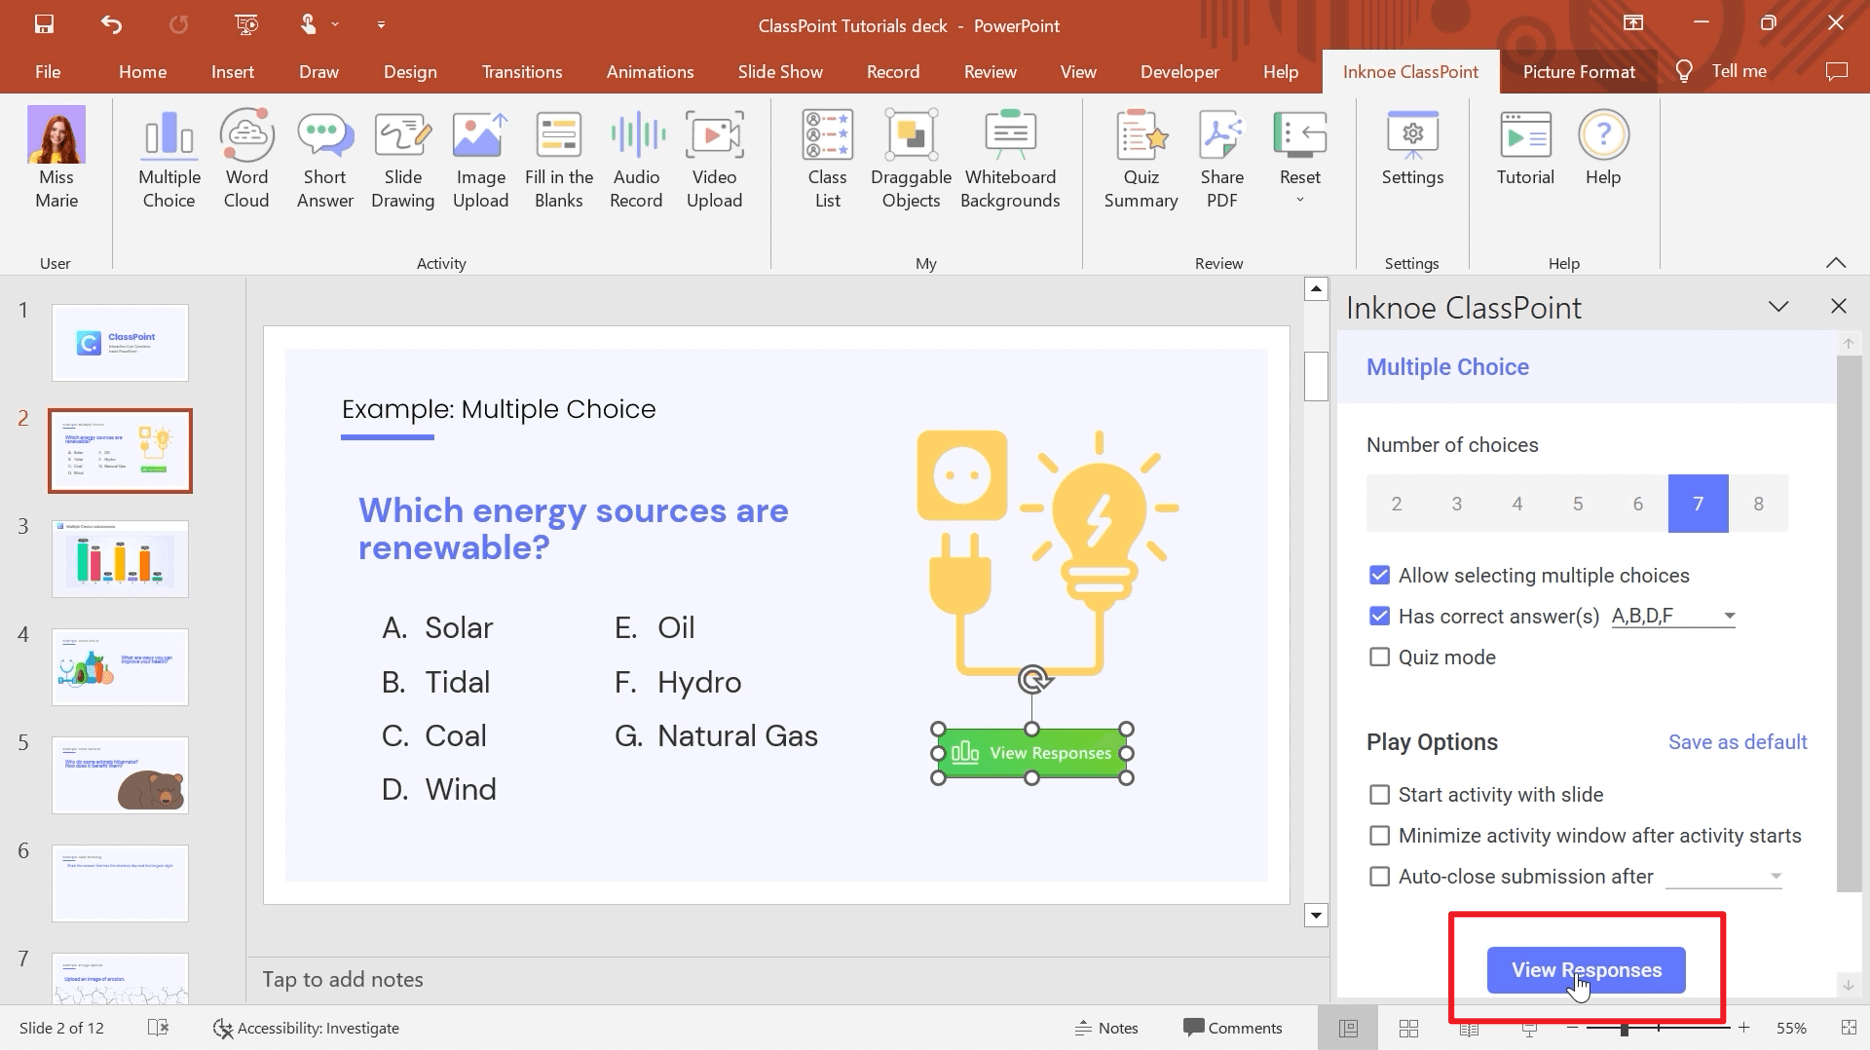 questions for powerpoint